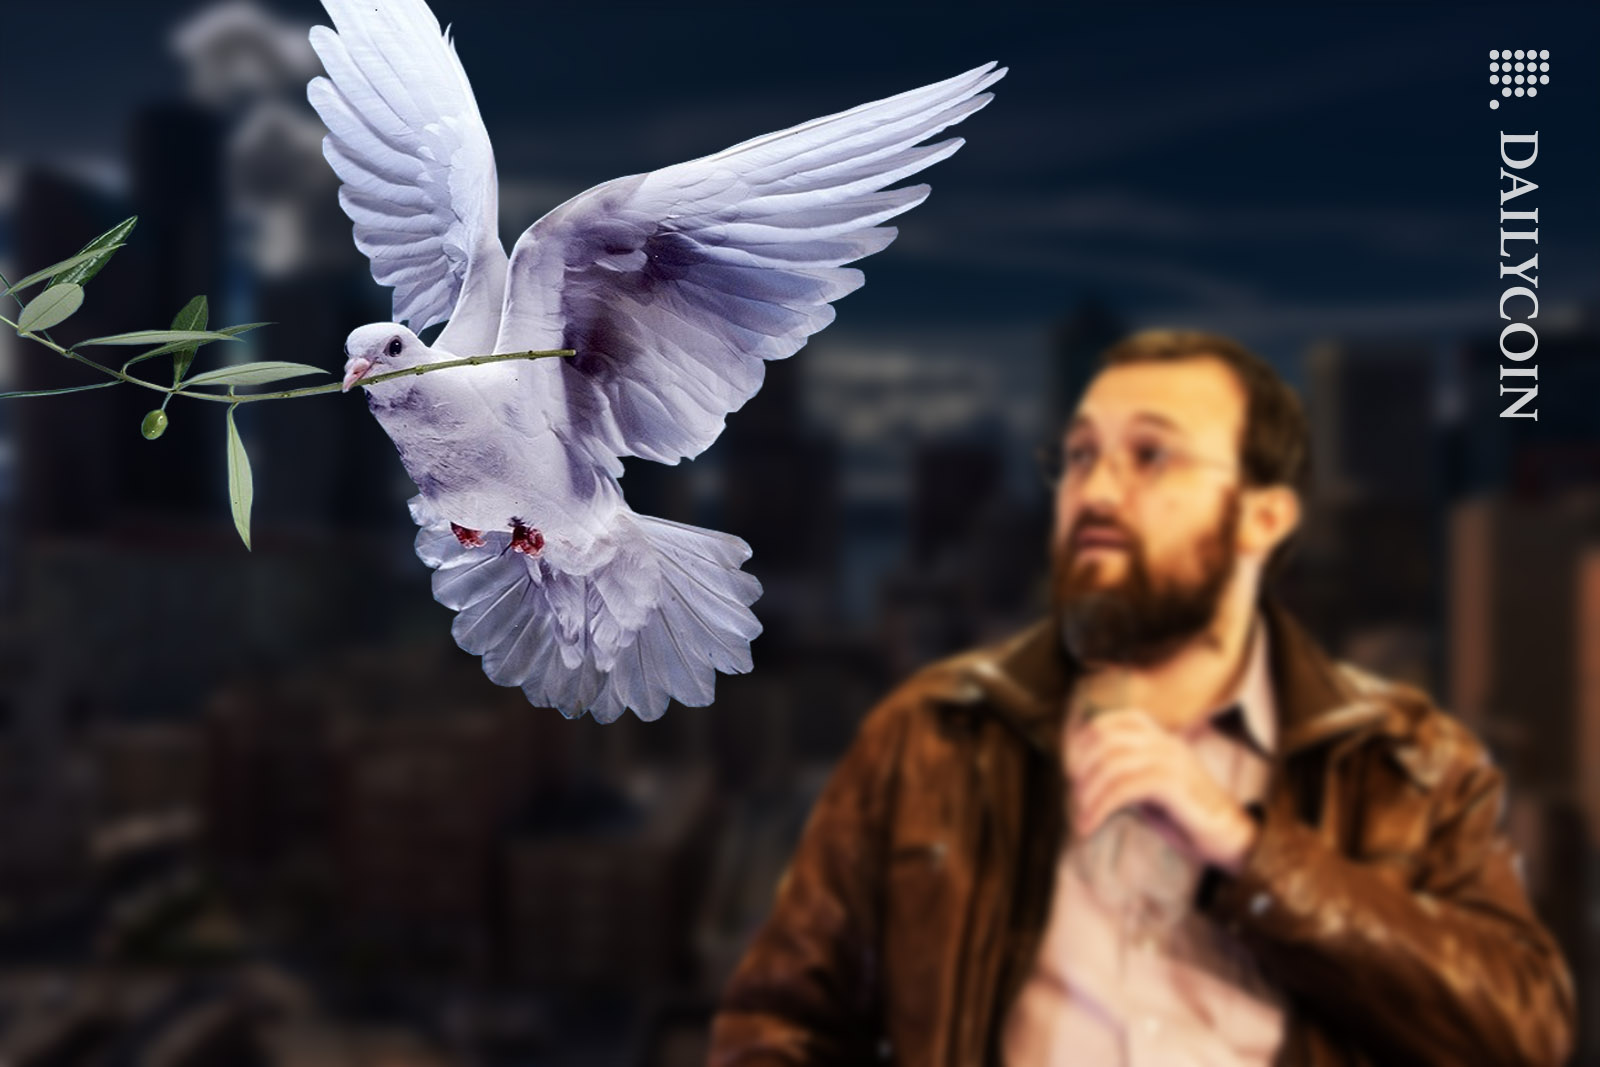 A white dove with an olive branch flying above the city with Charles Hoskinson in the background.